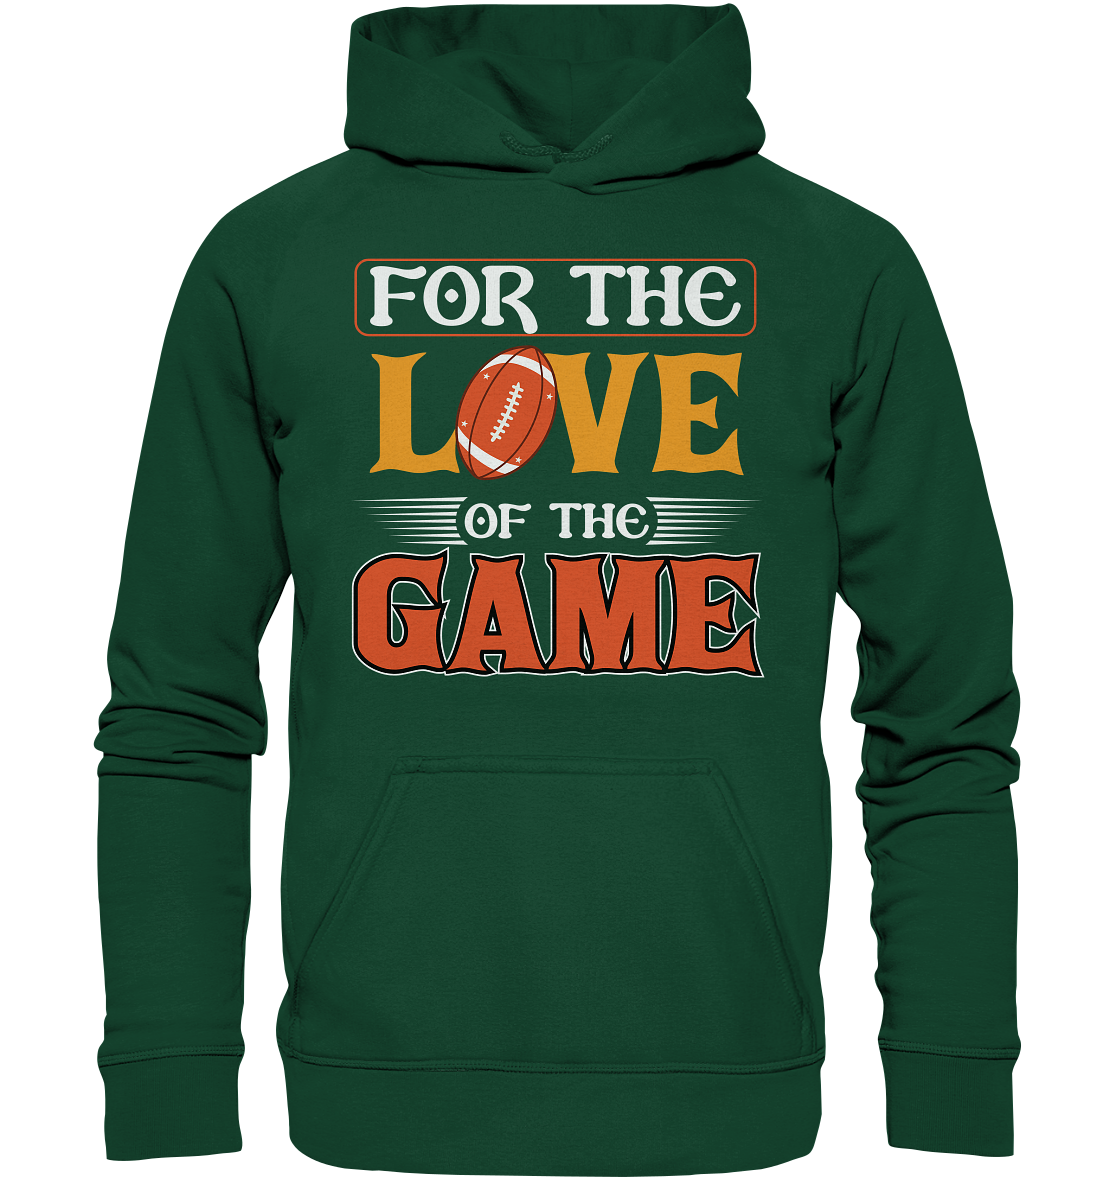 For the Love of the Game - Kids Premium Hoodie - Football Unity Football Unity